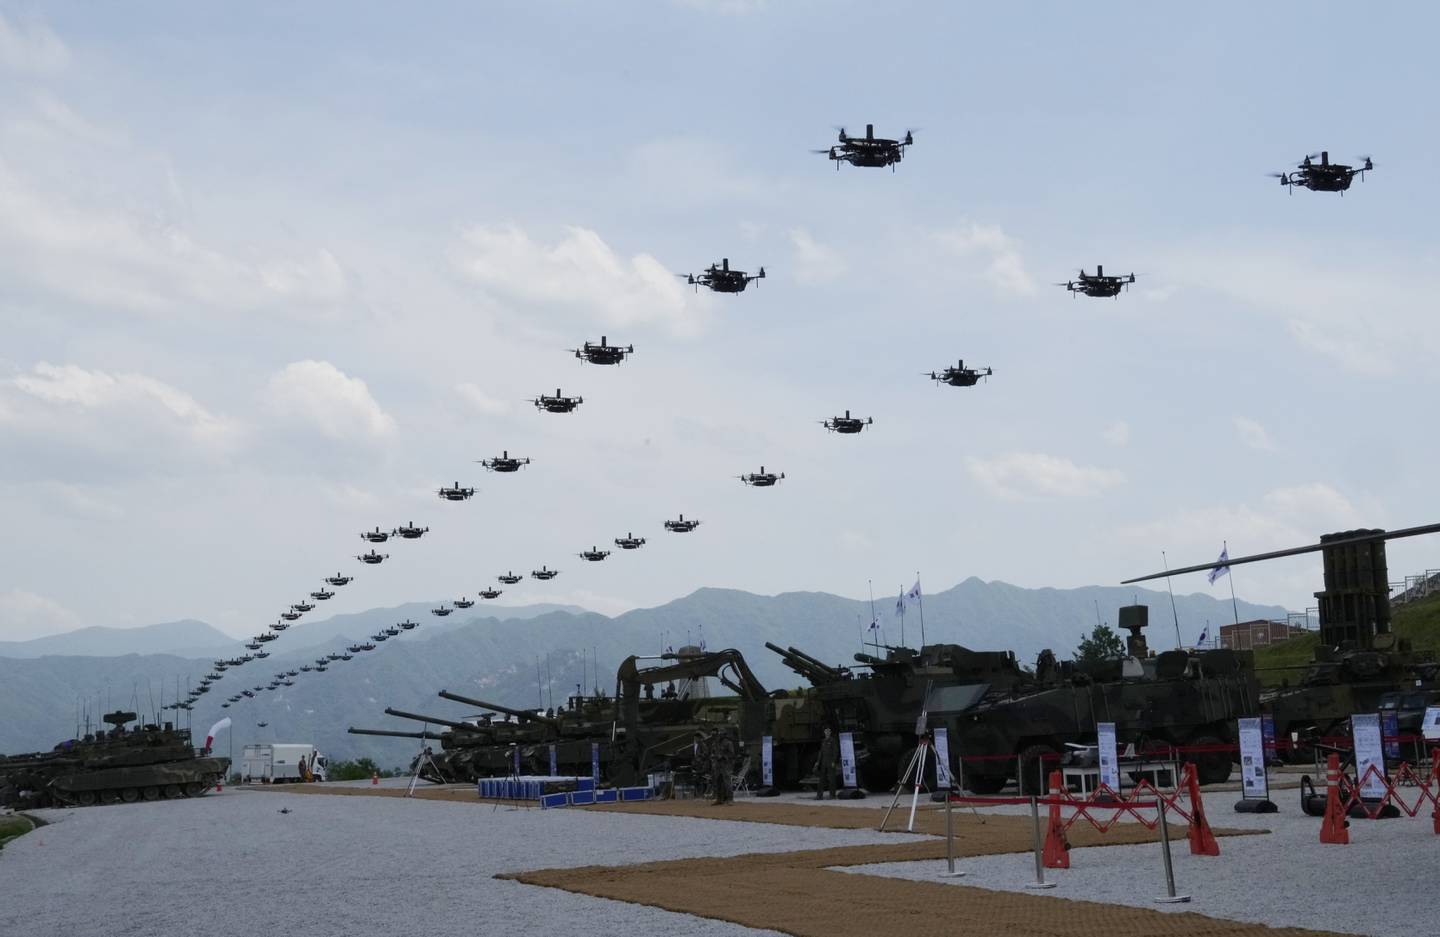 The South Korean army's drones fly during South Korea-U.S. joint military drills at Seungjin Fire Training Field in Pocheon, South Korea, Thursday, May 25, 2023.